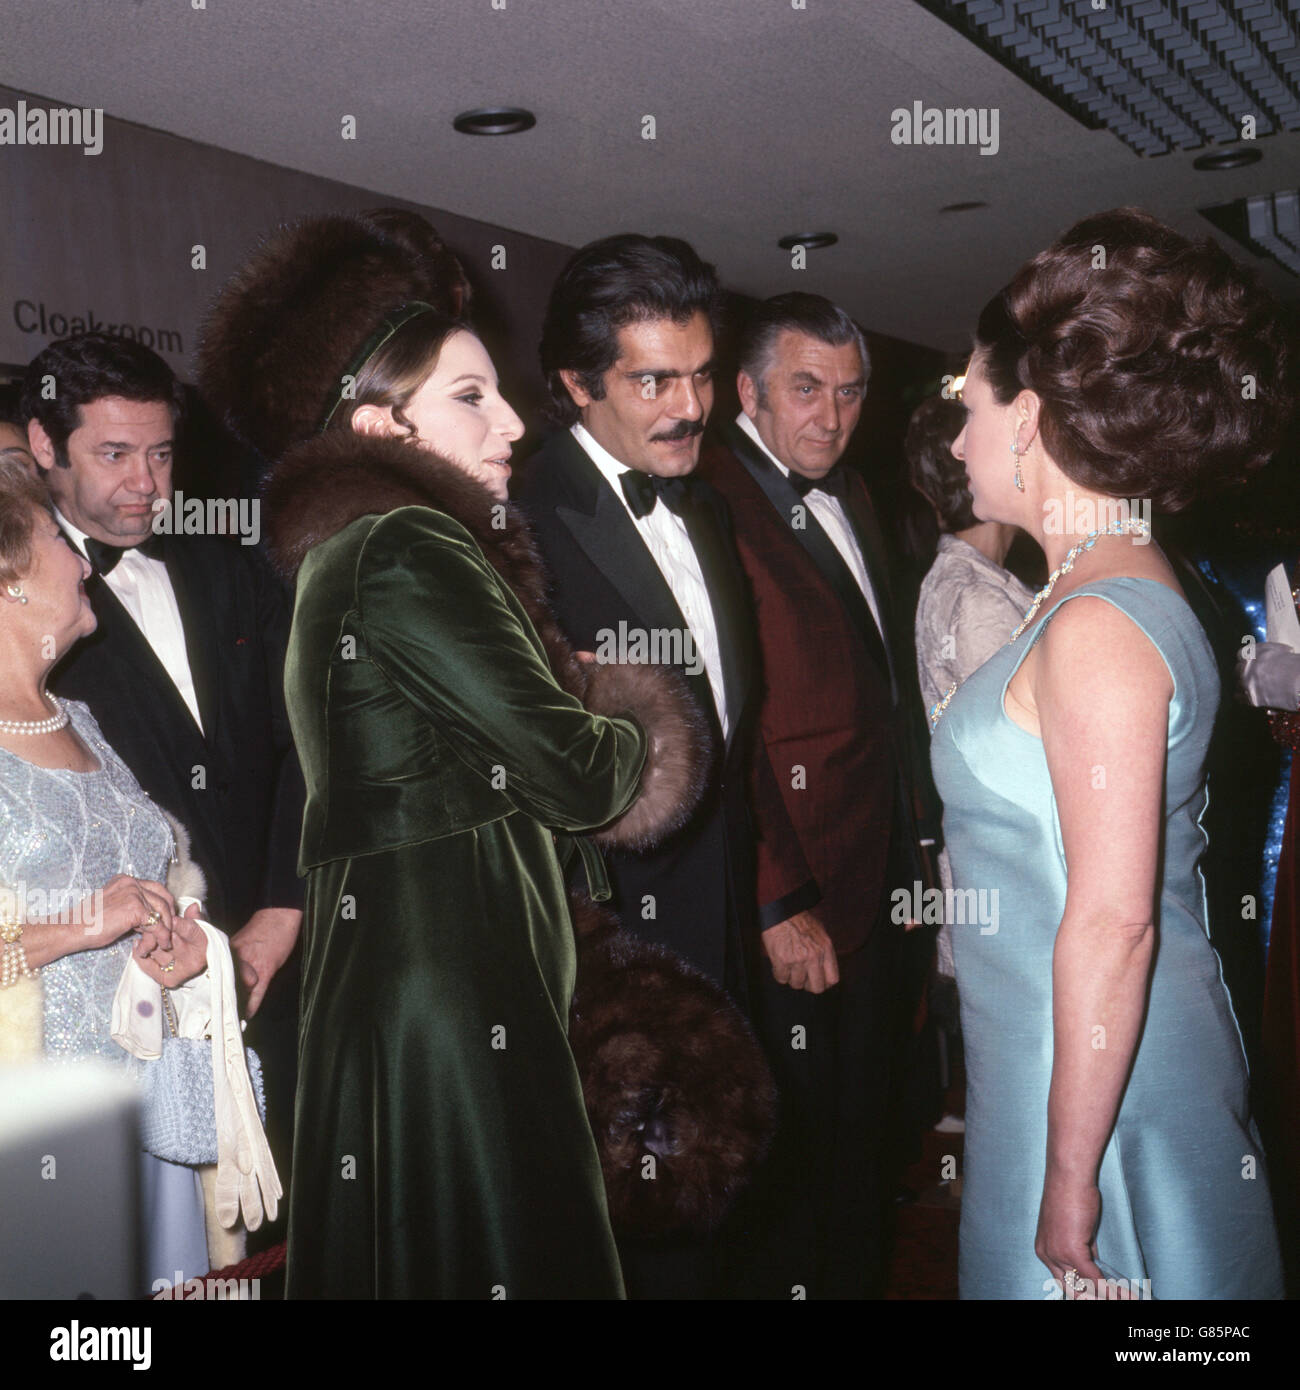 Princess Margaret talks with American actress Barbra Streisand (l) and Egyptian actor Omar Sharif (c) at the Royal Premiere of the film they are both appearing in 'Funny Girl' being held at the Odeon Theatre, Leicester Square, London. Stock Photo